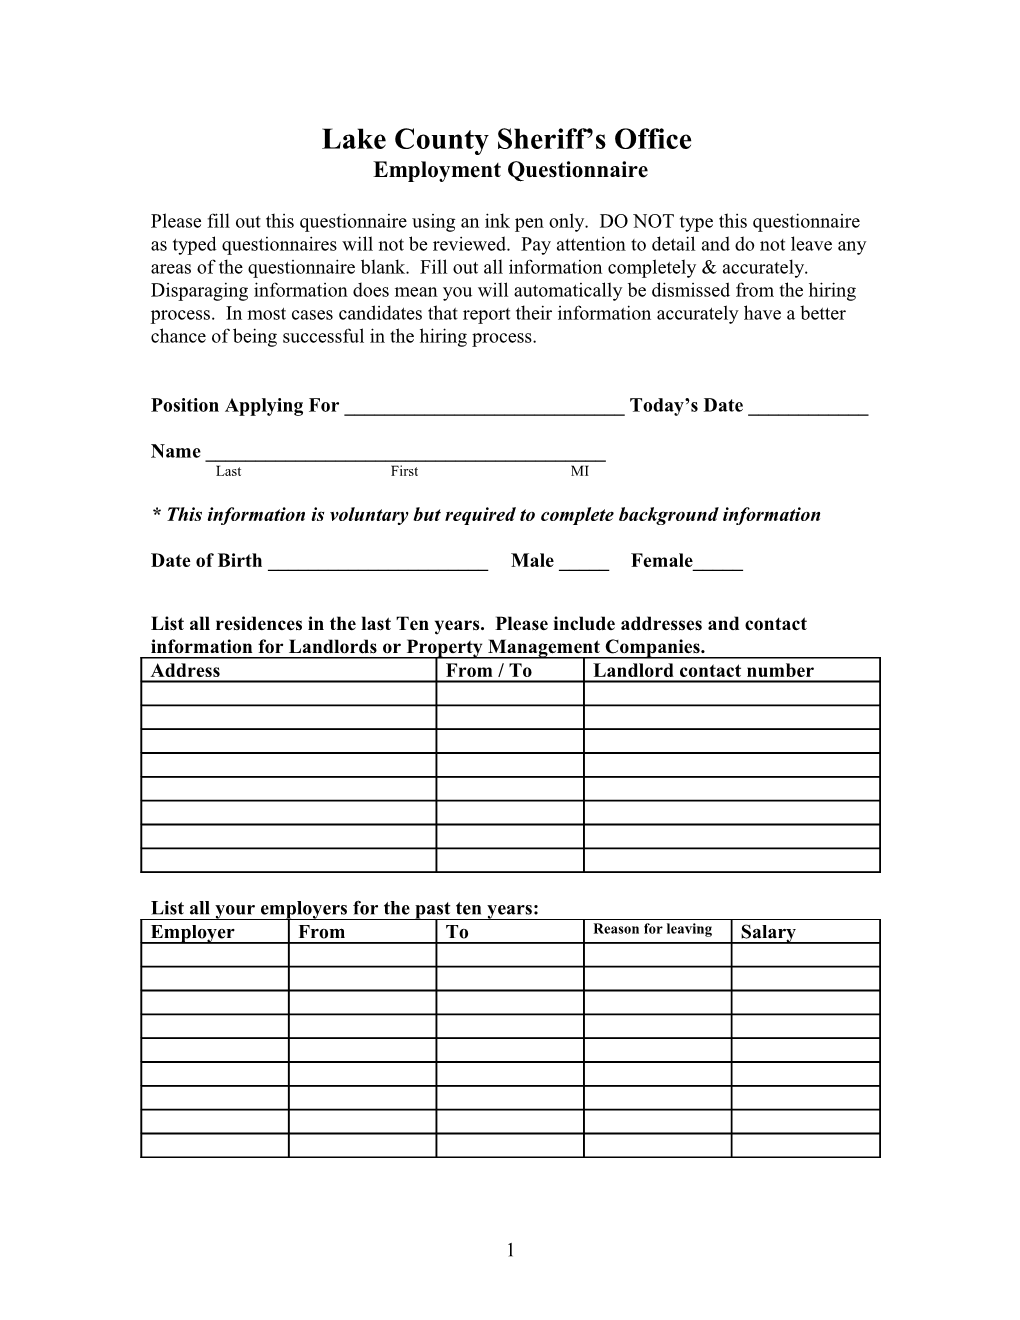 Lake County Sheriff S Office Employment Questionnaire